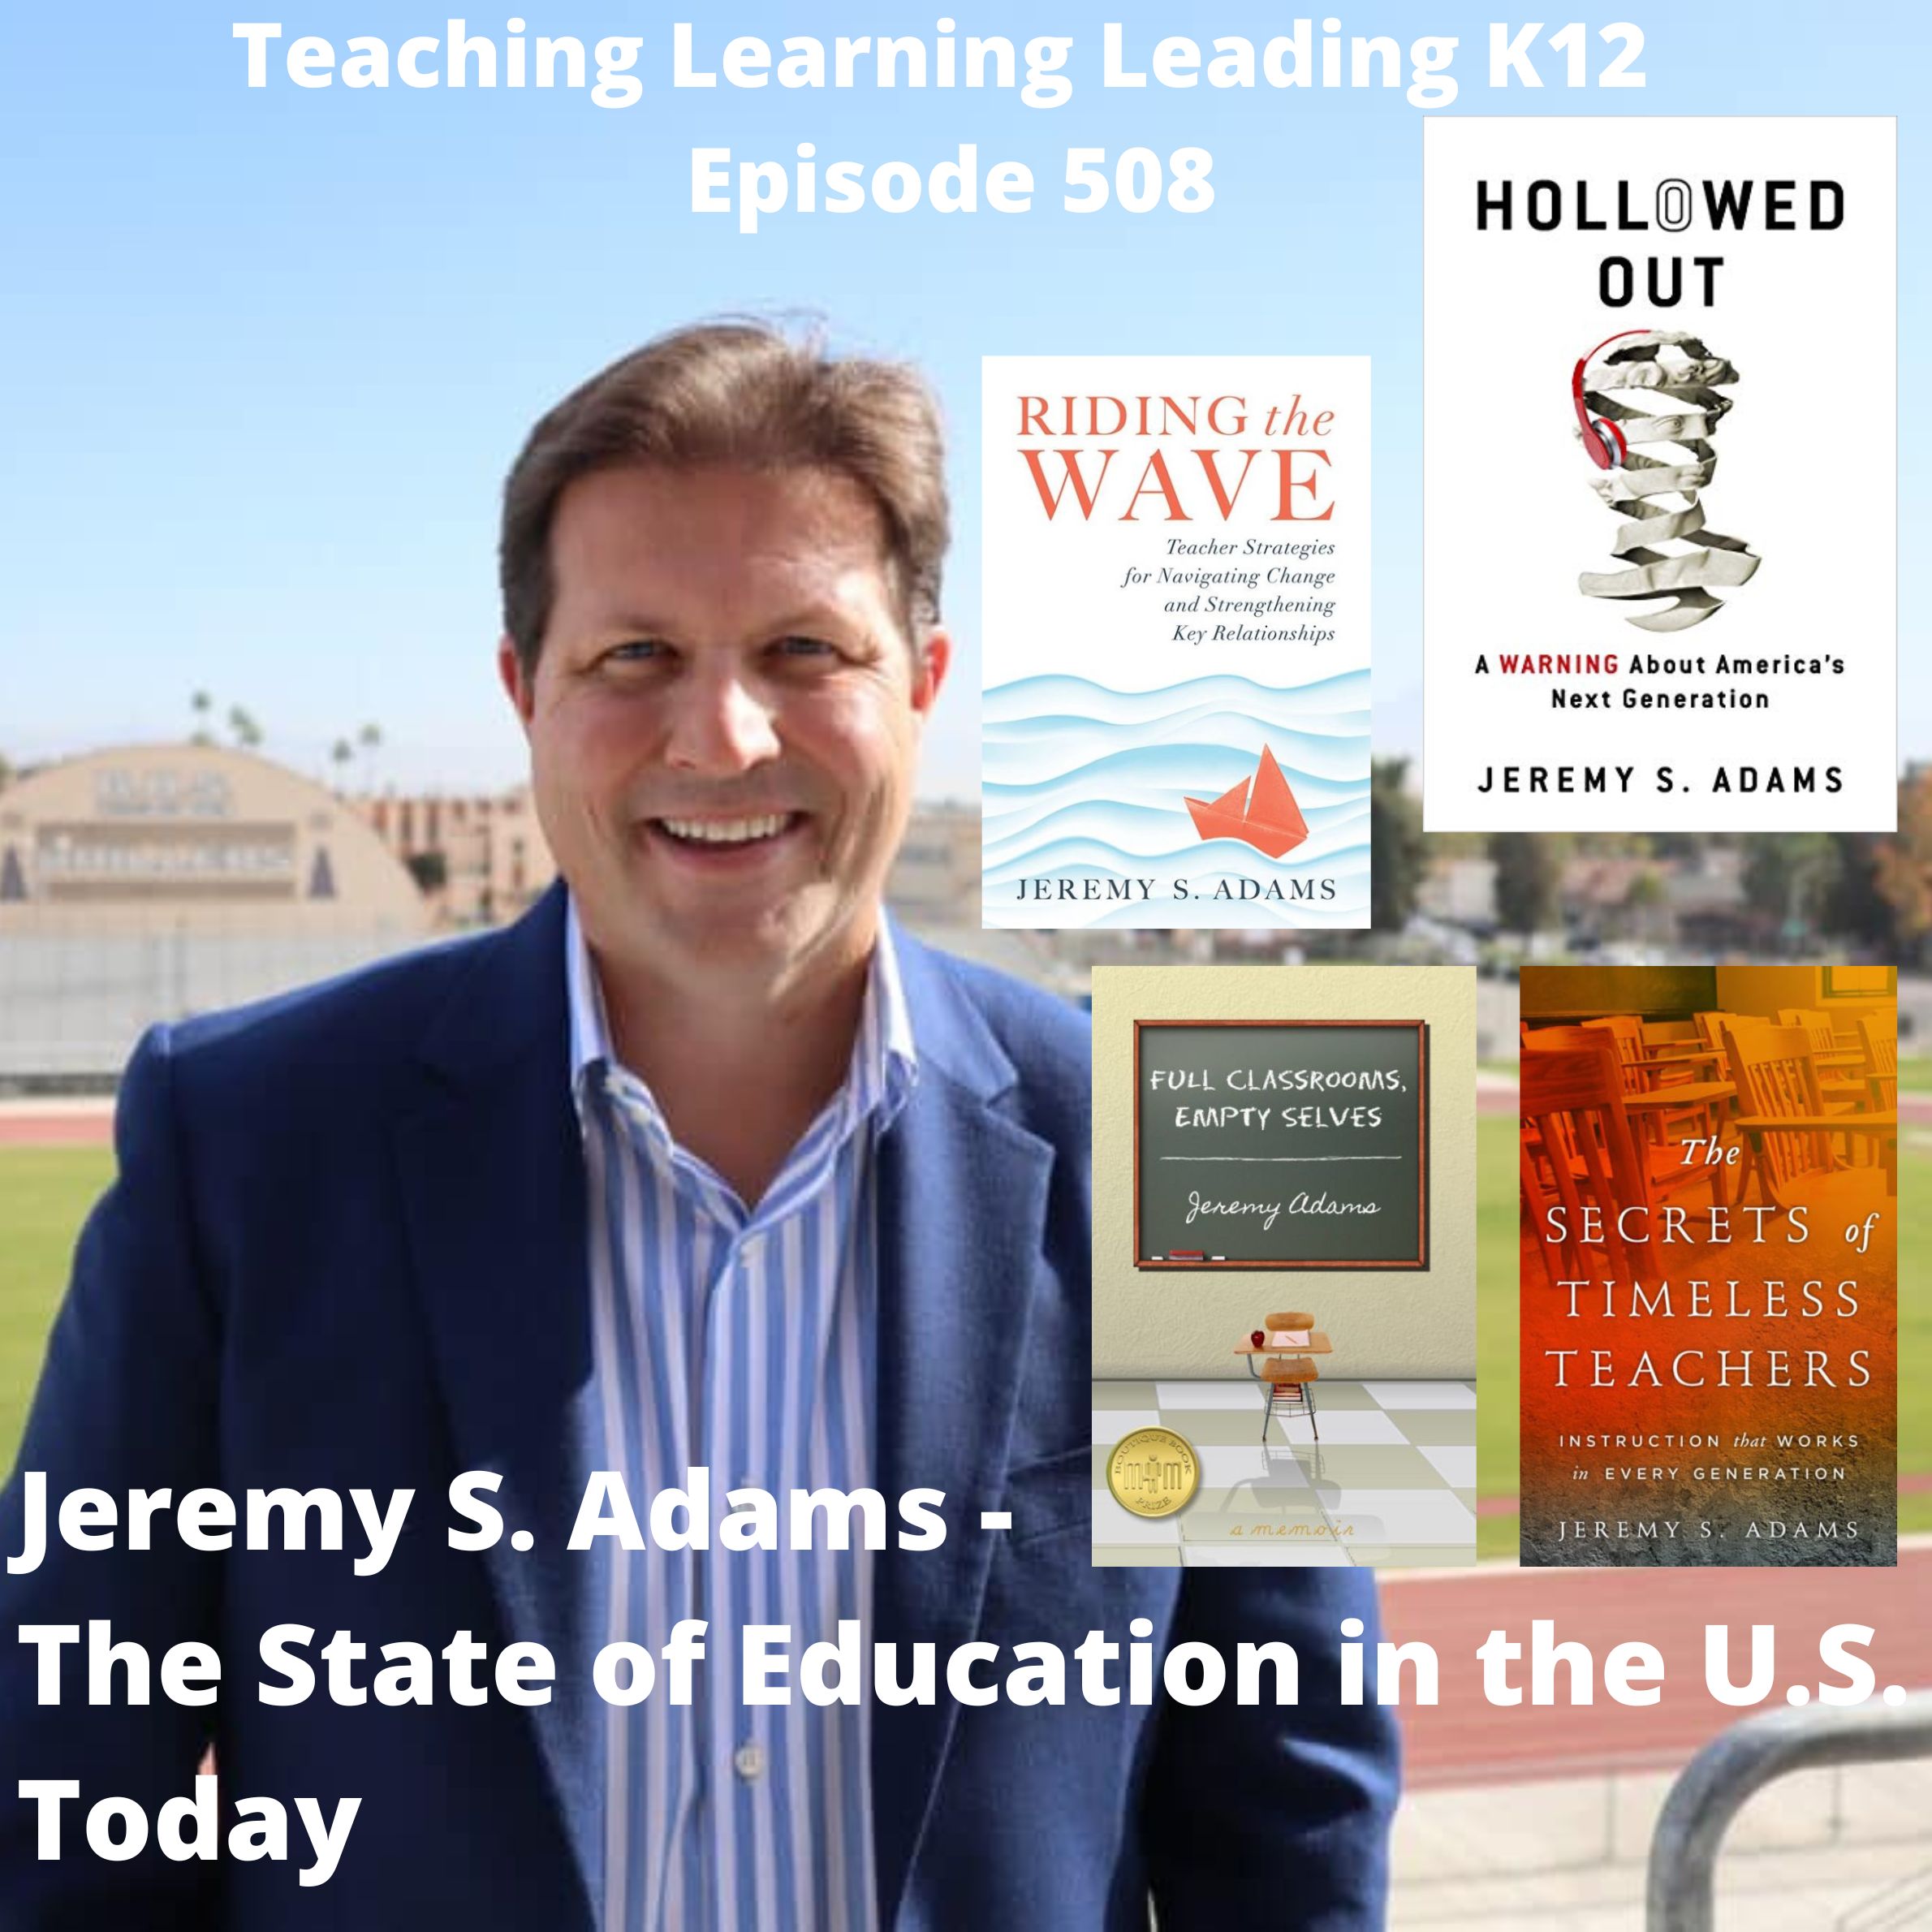 Jeremy S. Adams: The State of Education In the U.S. Today - 508